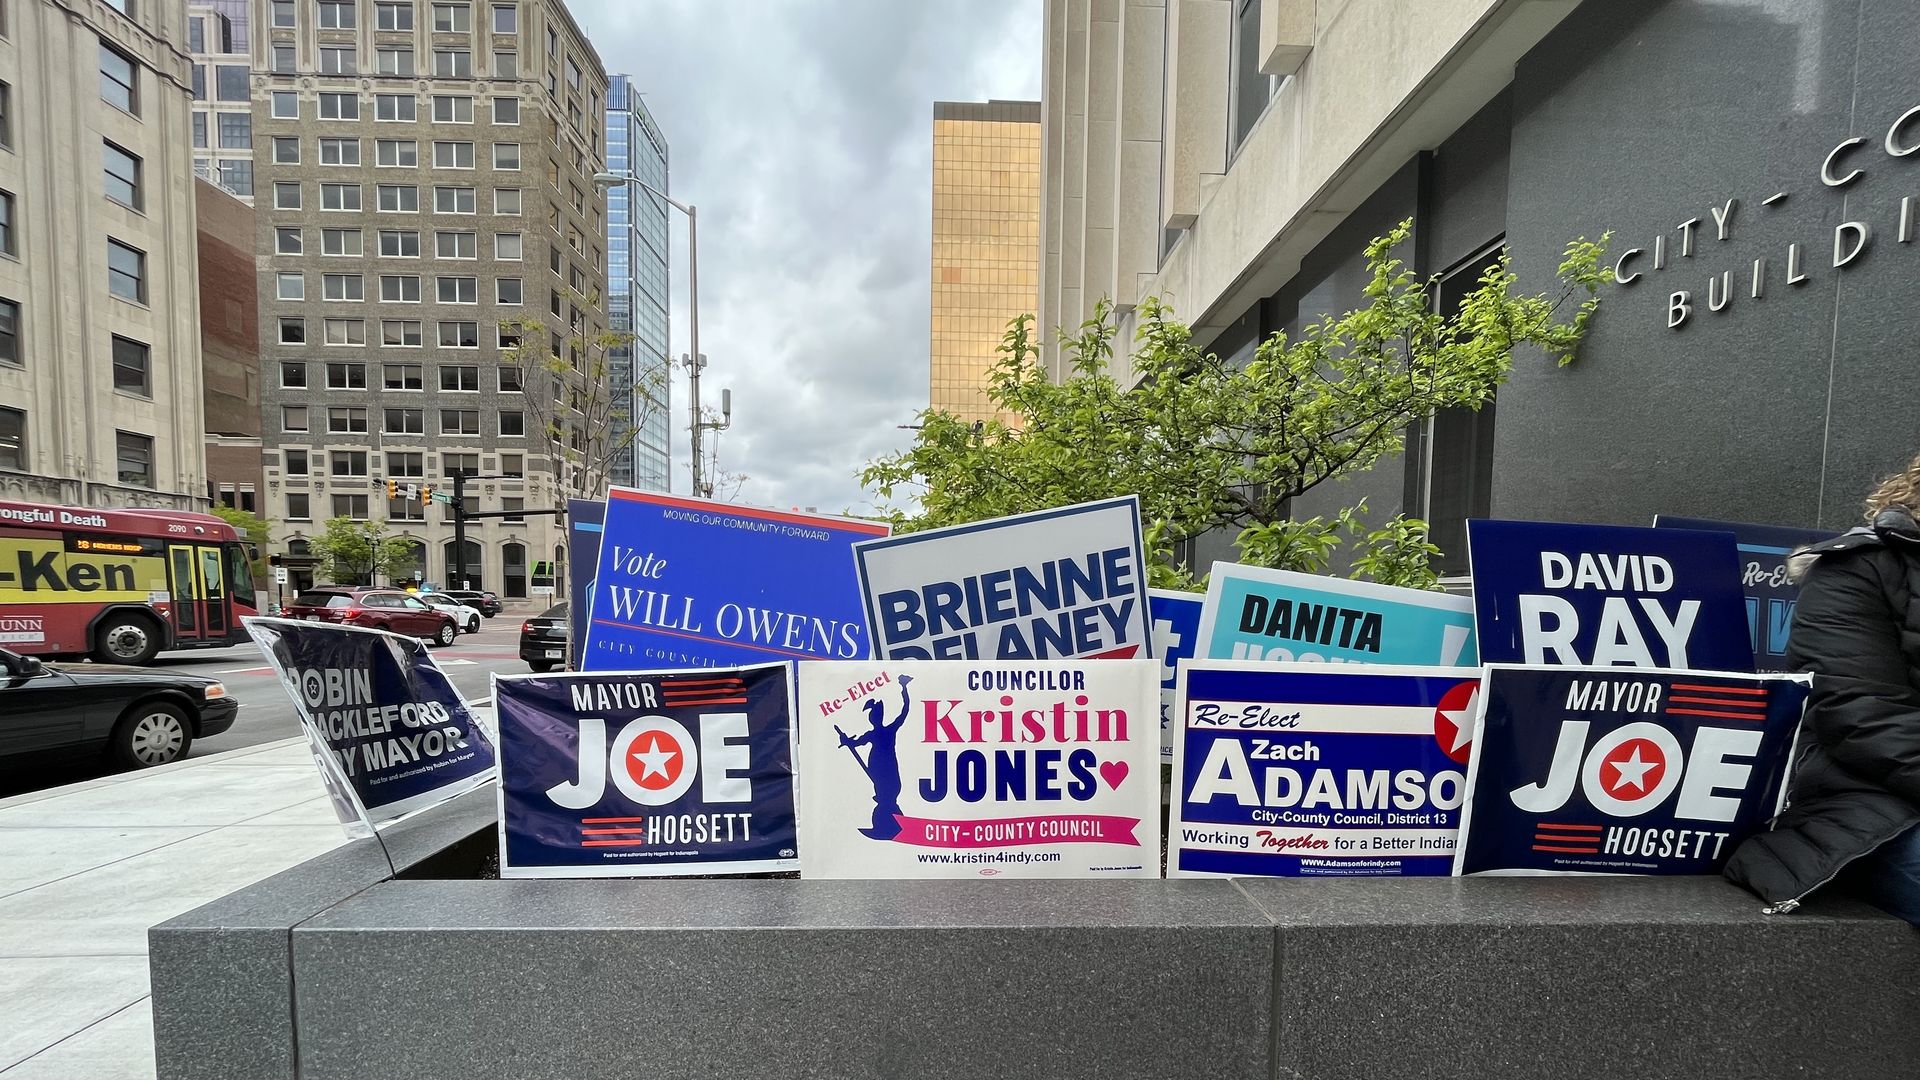 Yard signs stuffed in landscaping outside the City-County Building in downtown Indianapolis.